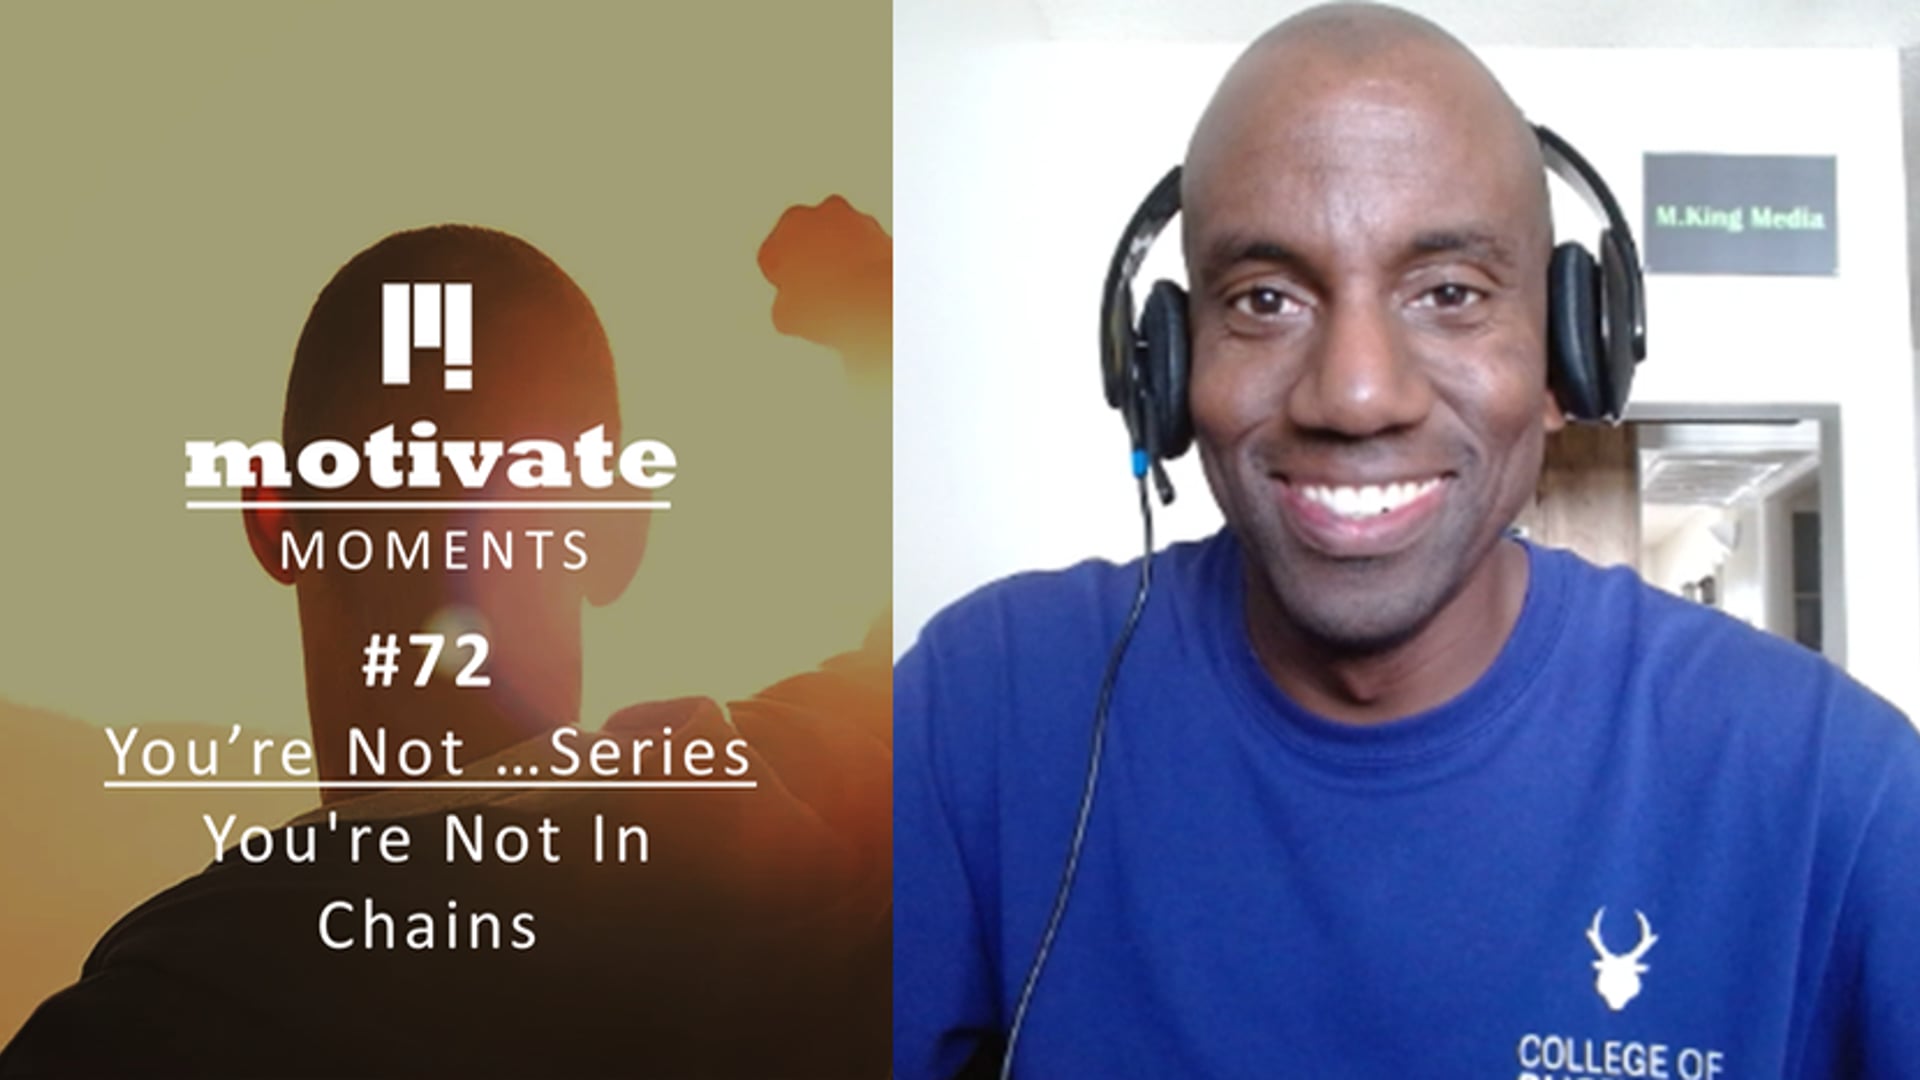 Motivate Moments #72 You're Not Series - You're Not In Chains